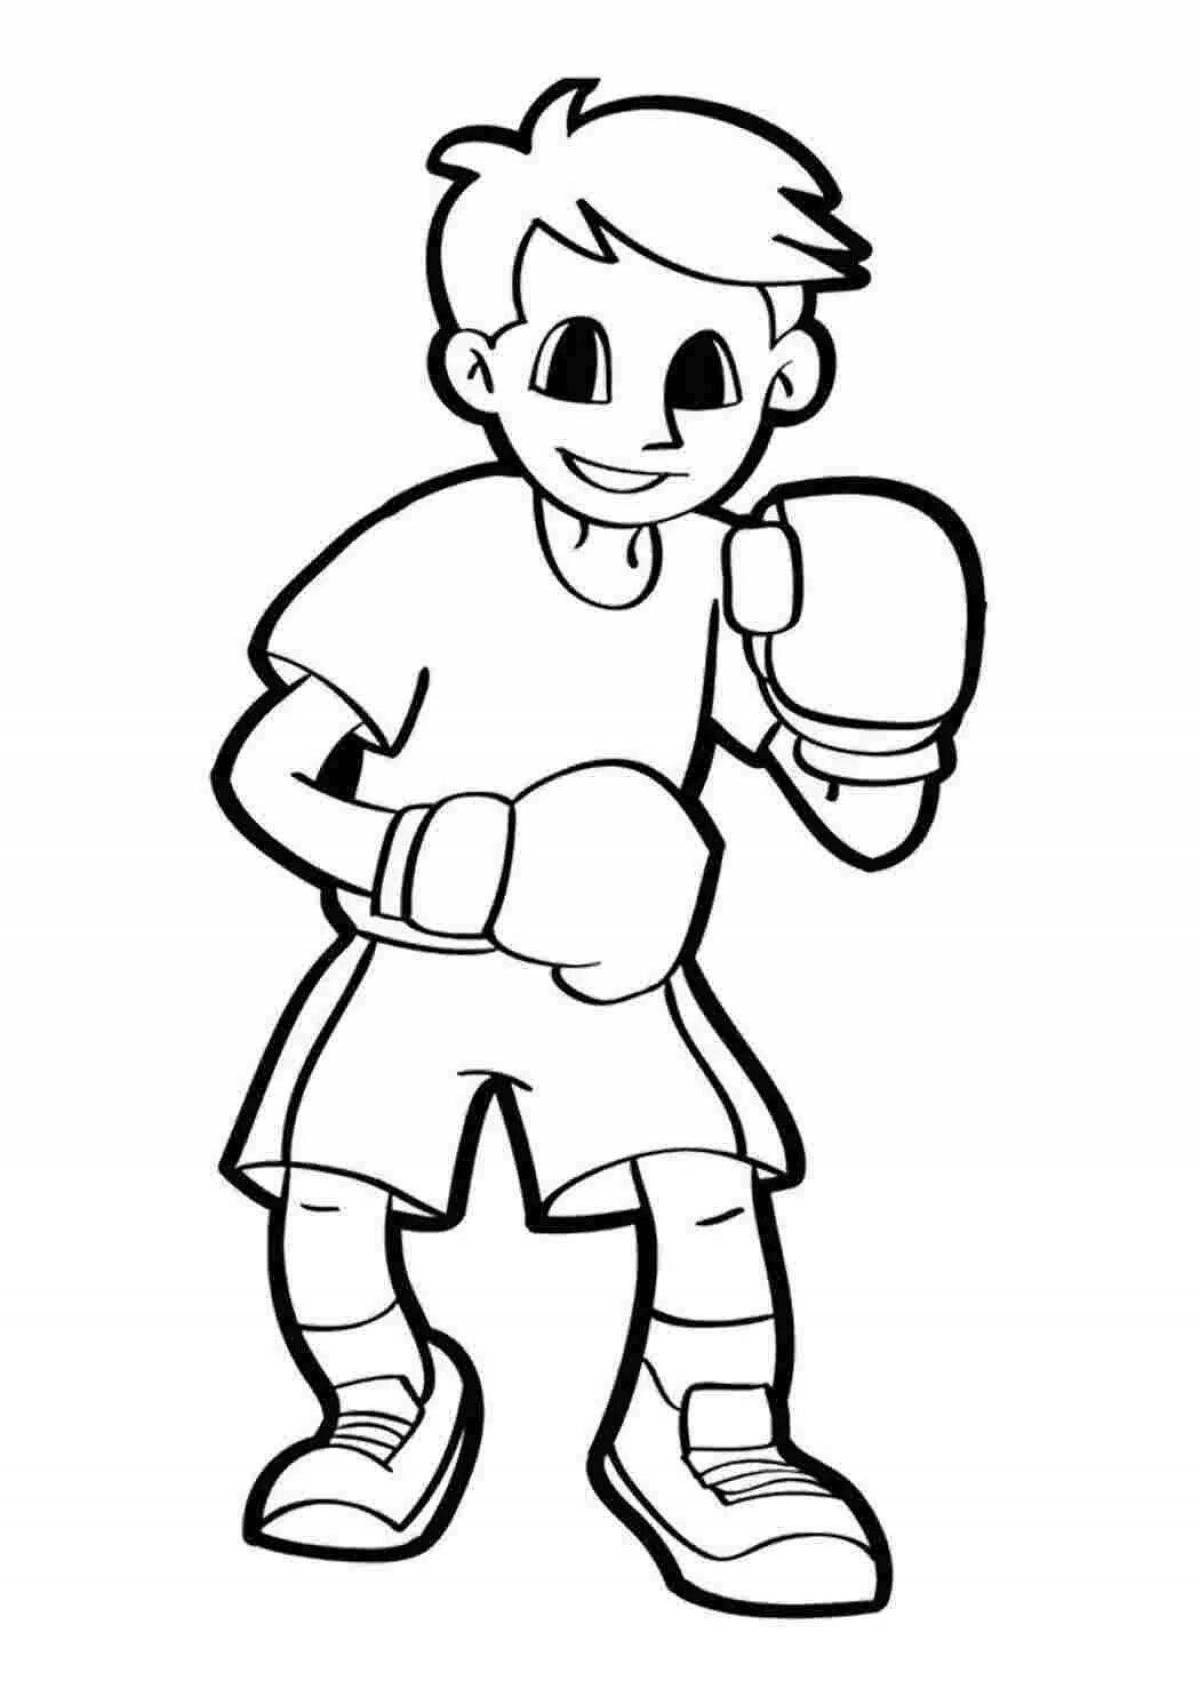 Attractive boxing coloring book for kids